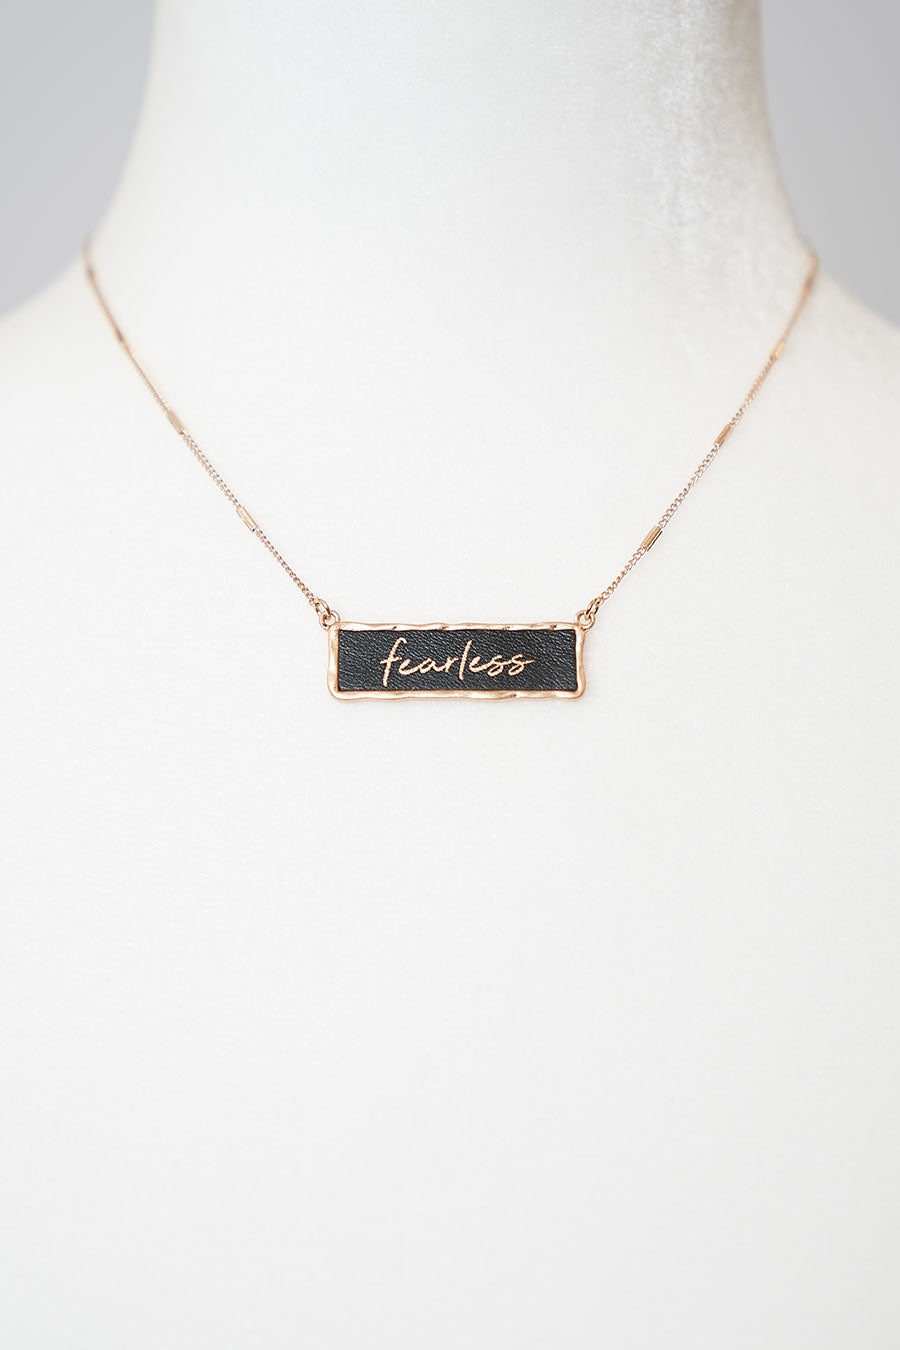 Fearless Necklace Wearing